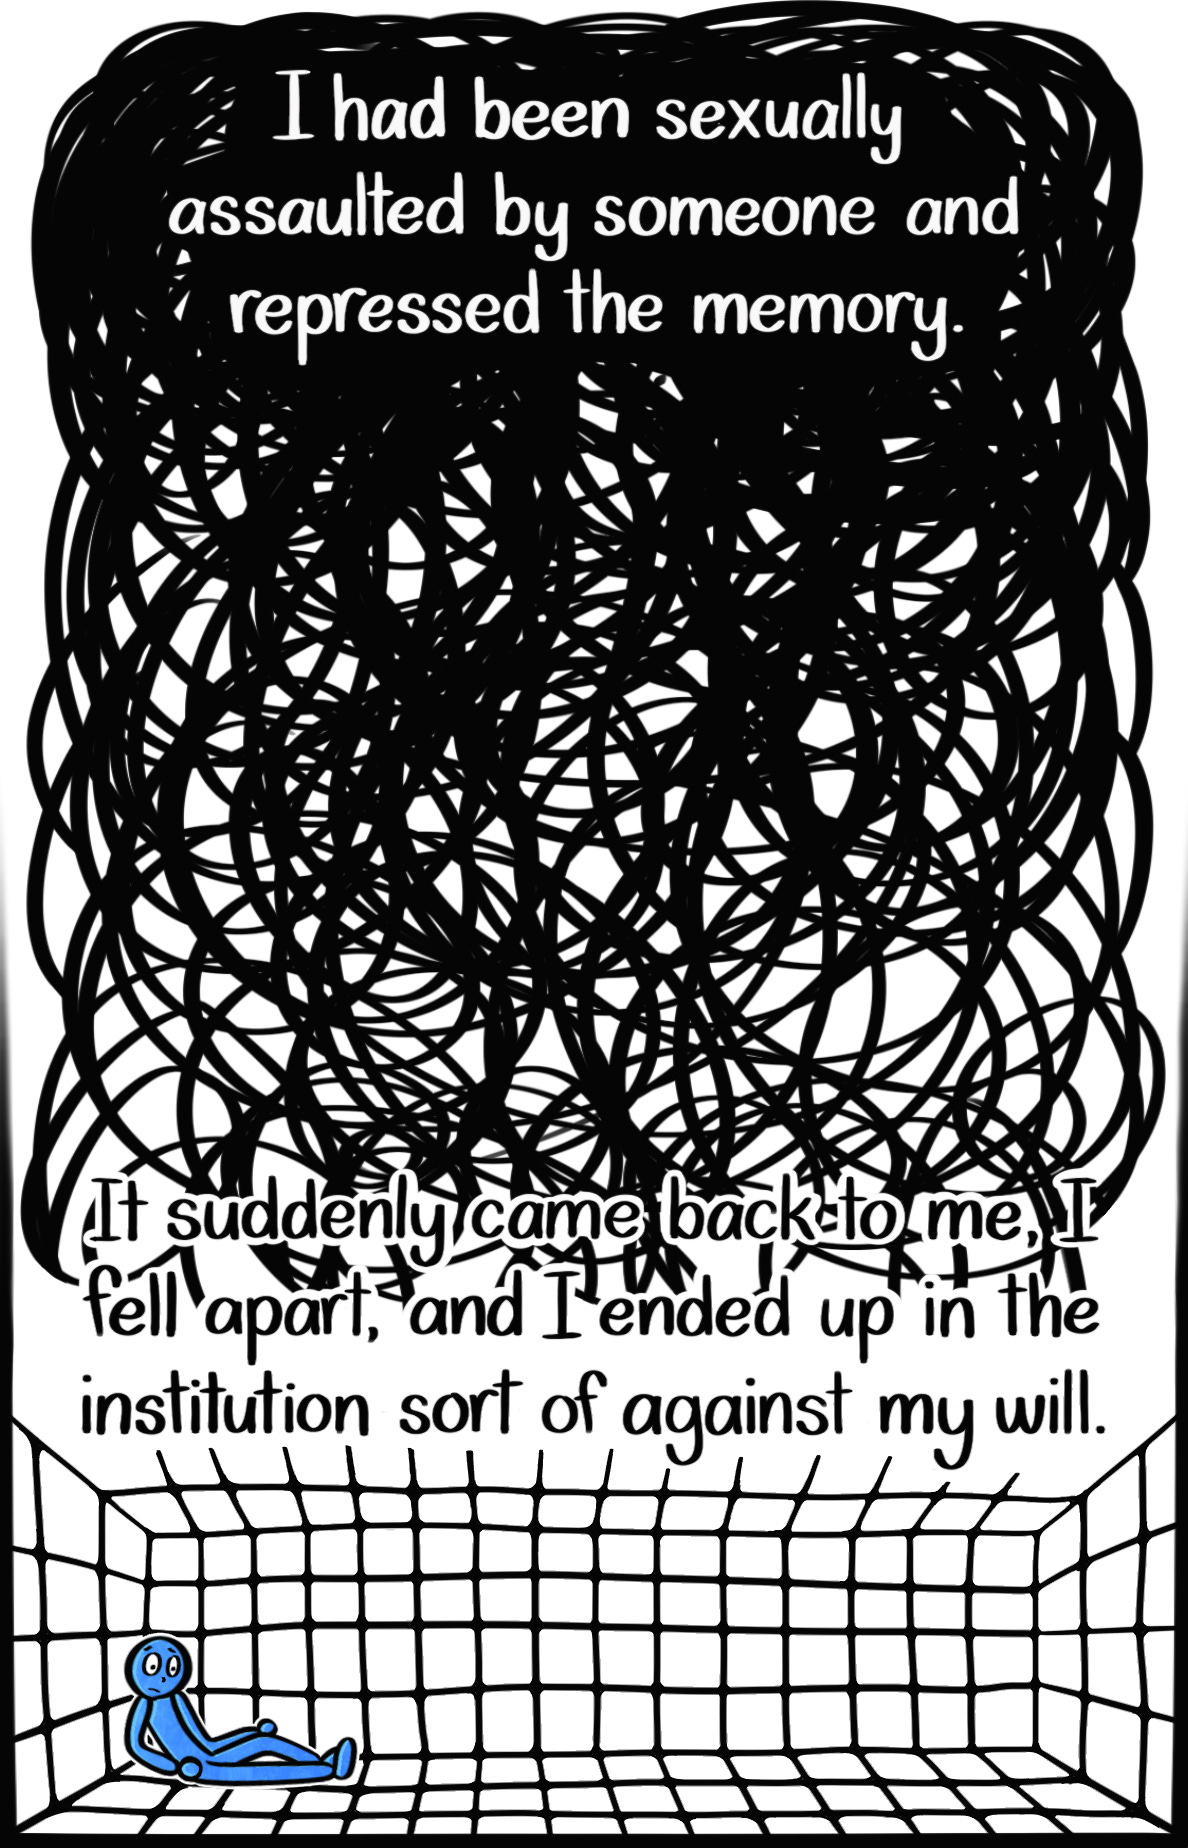 Caption: I had been sexually assaulted by someone and repressed the memory. It came back to me, I fell apart, and I ended up in the institution sort of against my will. Image: Thick, condensed black scribbles that get lighter as you scroll down. At the very bottom, the Blue Person leans against the wall of a large padded room, looking stunned.